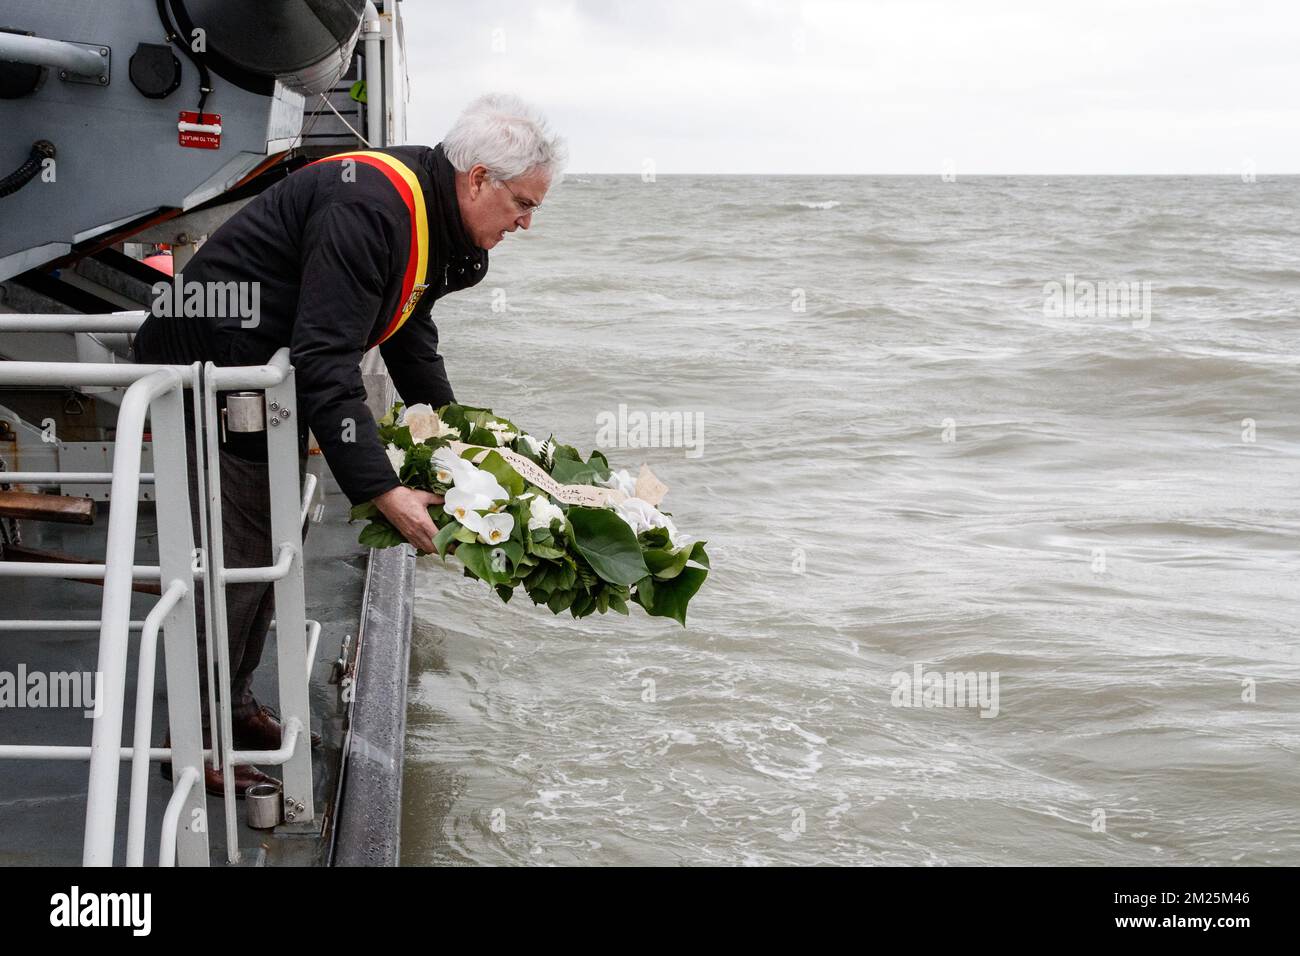 West-Flanders province governor Carl Decaluwe pictured during the 30th anniversary of the Herald of Free Enterprise ferry disaster, on Monday 06 March 2017 in Zeebrugge. On 6 March 1987 the ferry left the harbor of Zeebrugge, bound for Dover with more than 450 passengers and 80 crew members on board. It capsized just outside the harbor. The disaster, which was caused by the failure to close the bow doors, cost the life of 194 people. BELGA PHOTO KURT DESPLENTER Stock Photo